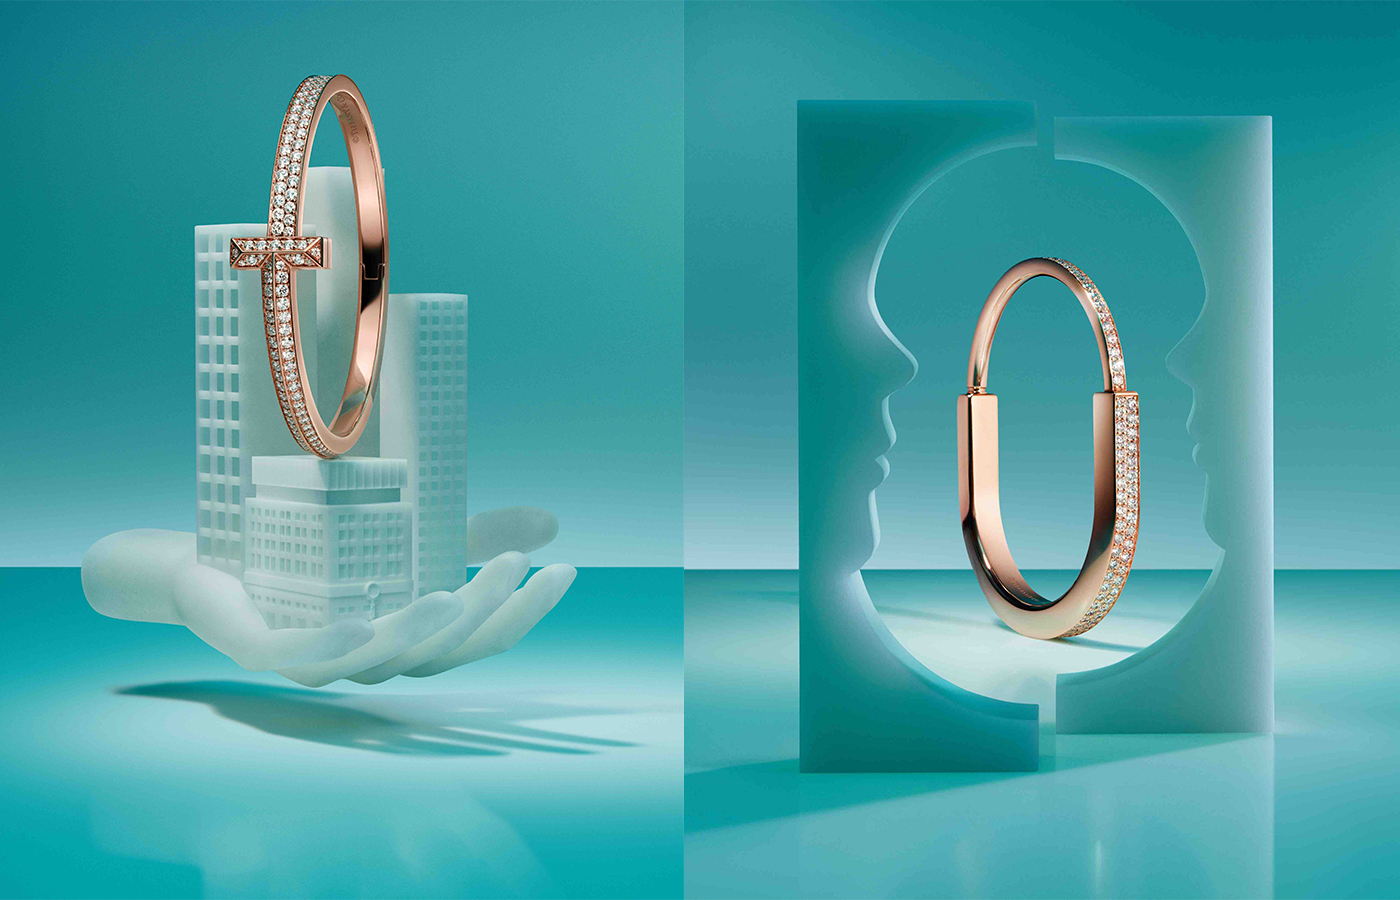  Tiffany & Co.'s "With Love, Since 1837" Campaign Is A Work Of Art